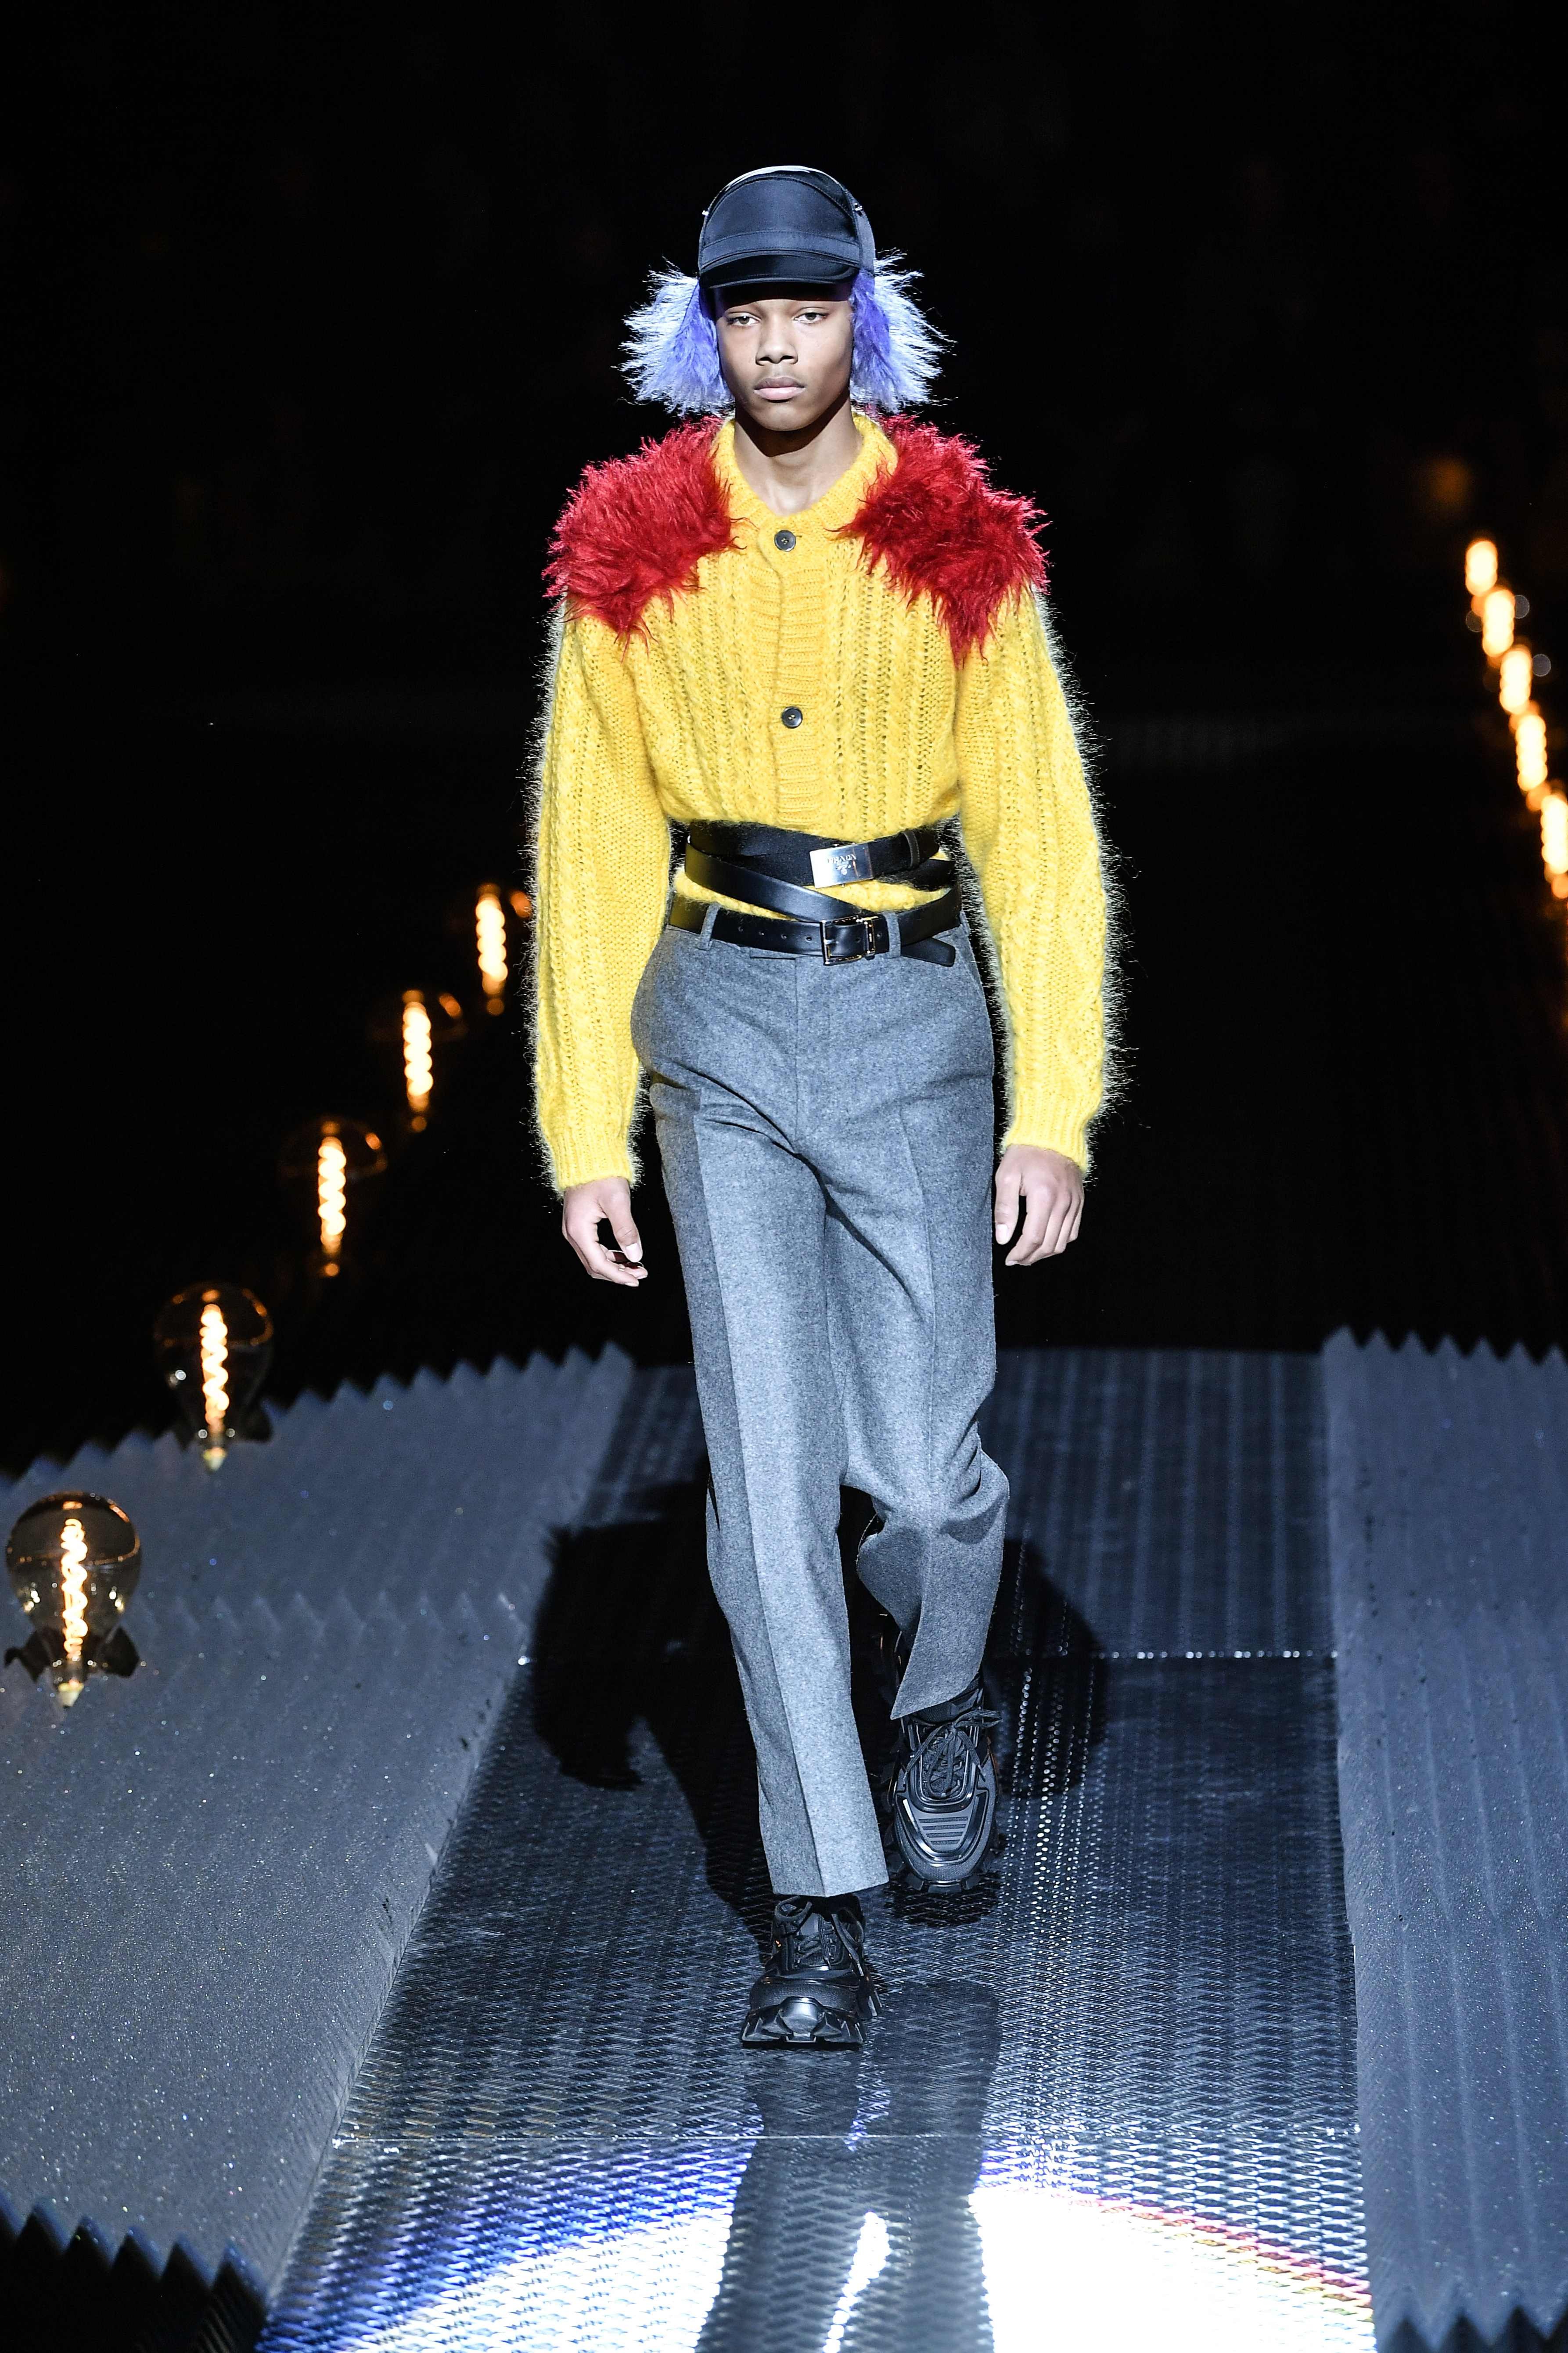 Milan Fashion Week: whimsical Prada 'joins the army' for its fall/winter  2019/20 menswear show